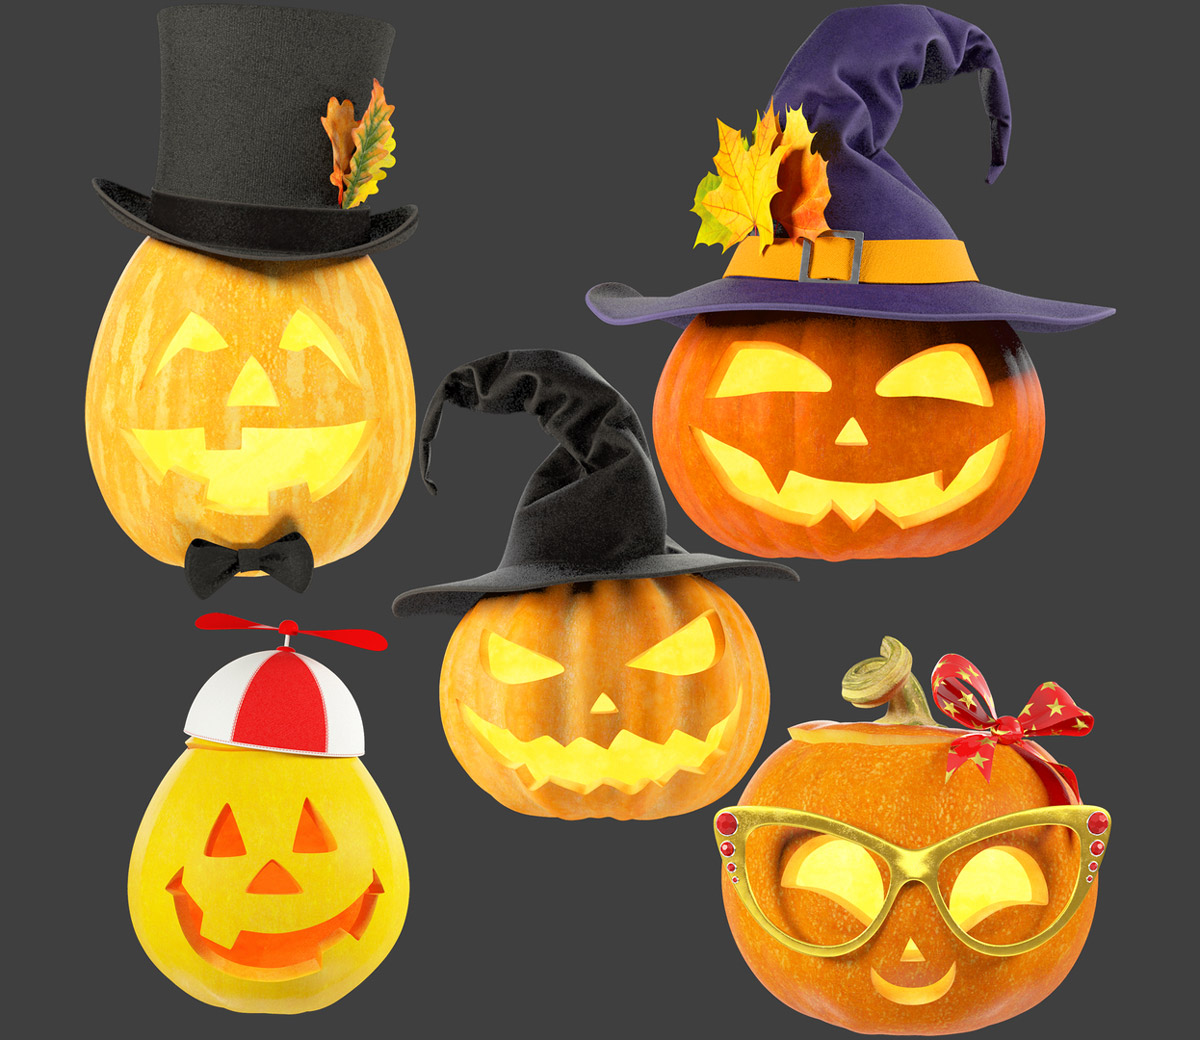 Our favorite 3D model from the collection of Amaranthus: a 3D Halloween Pumpkin Family